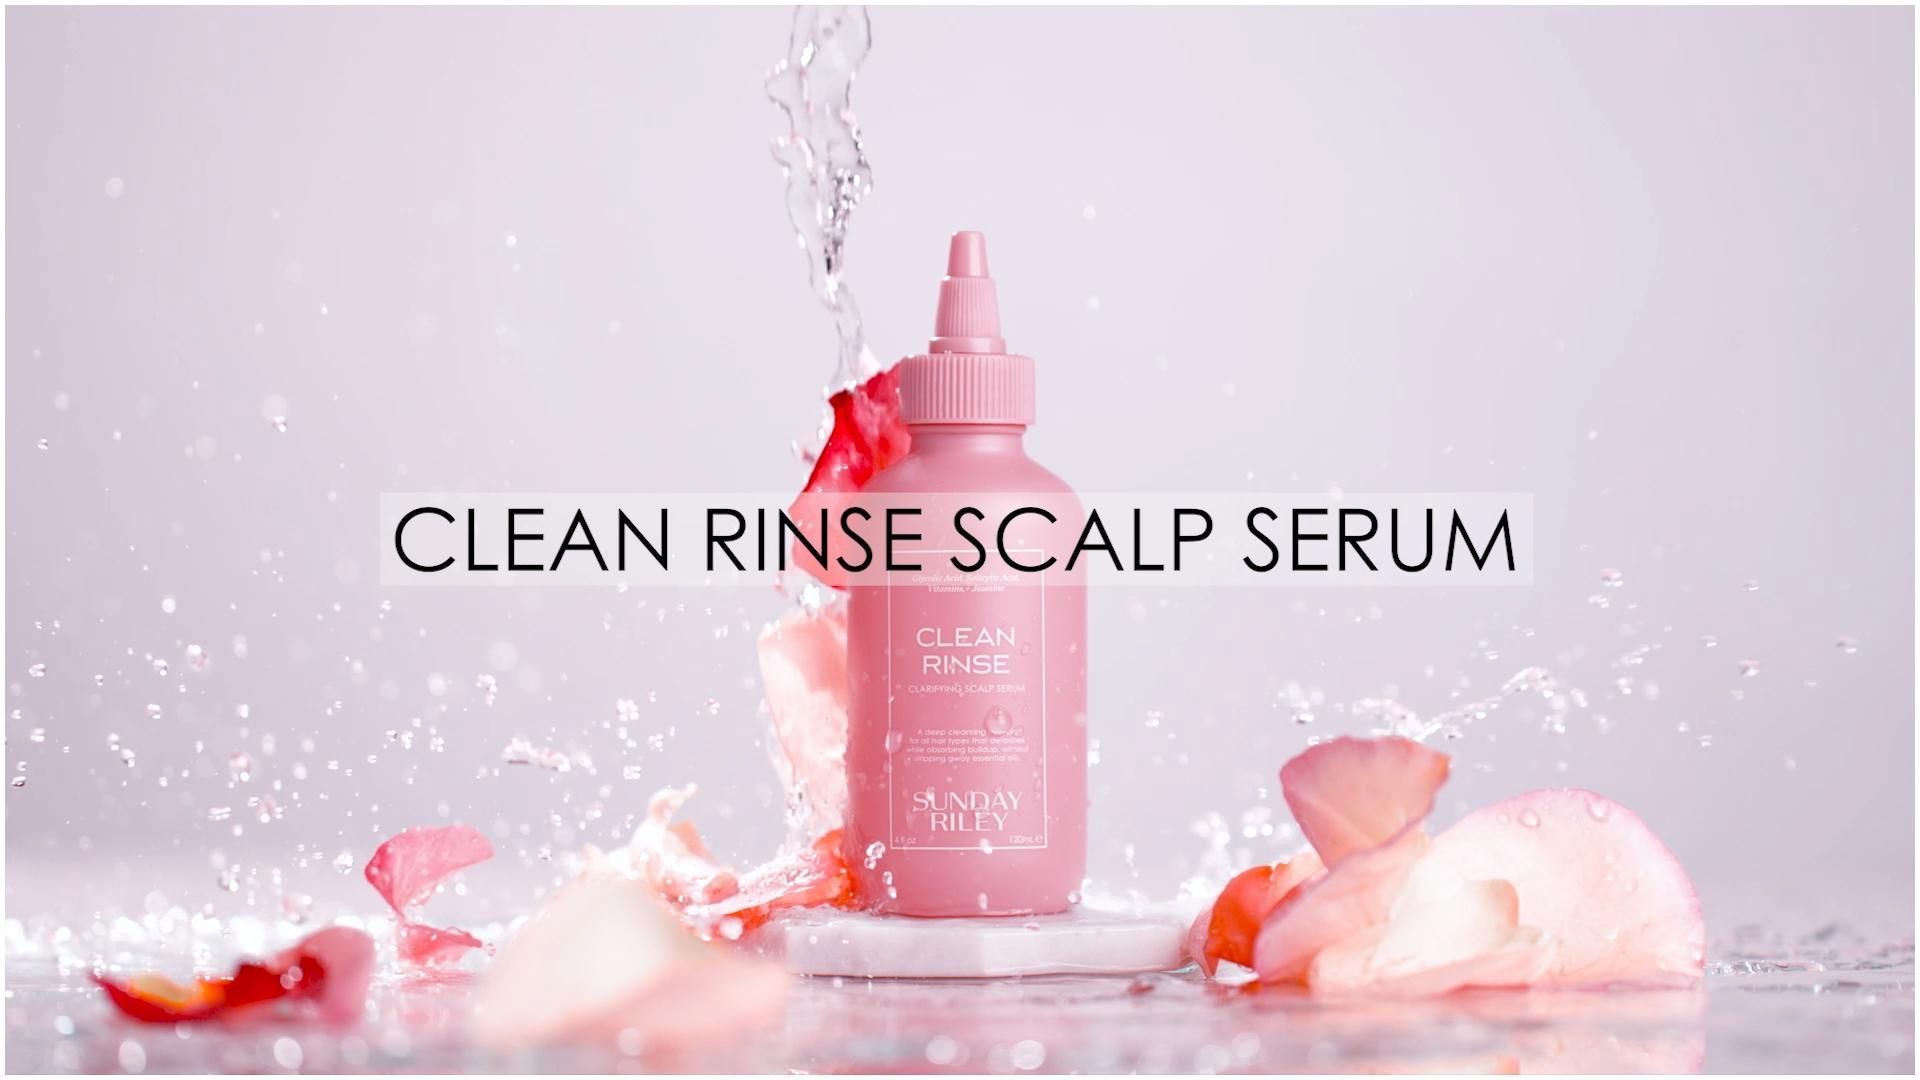 Clean Rinse Clarifying Scalp Serum from Sunday Riley - Clean Rinse Clarifying Scalp Serum from Sunday Riley -   17 beauty Products background ideas